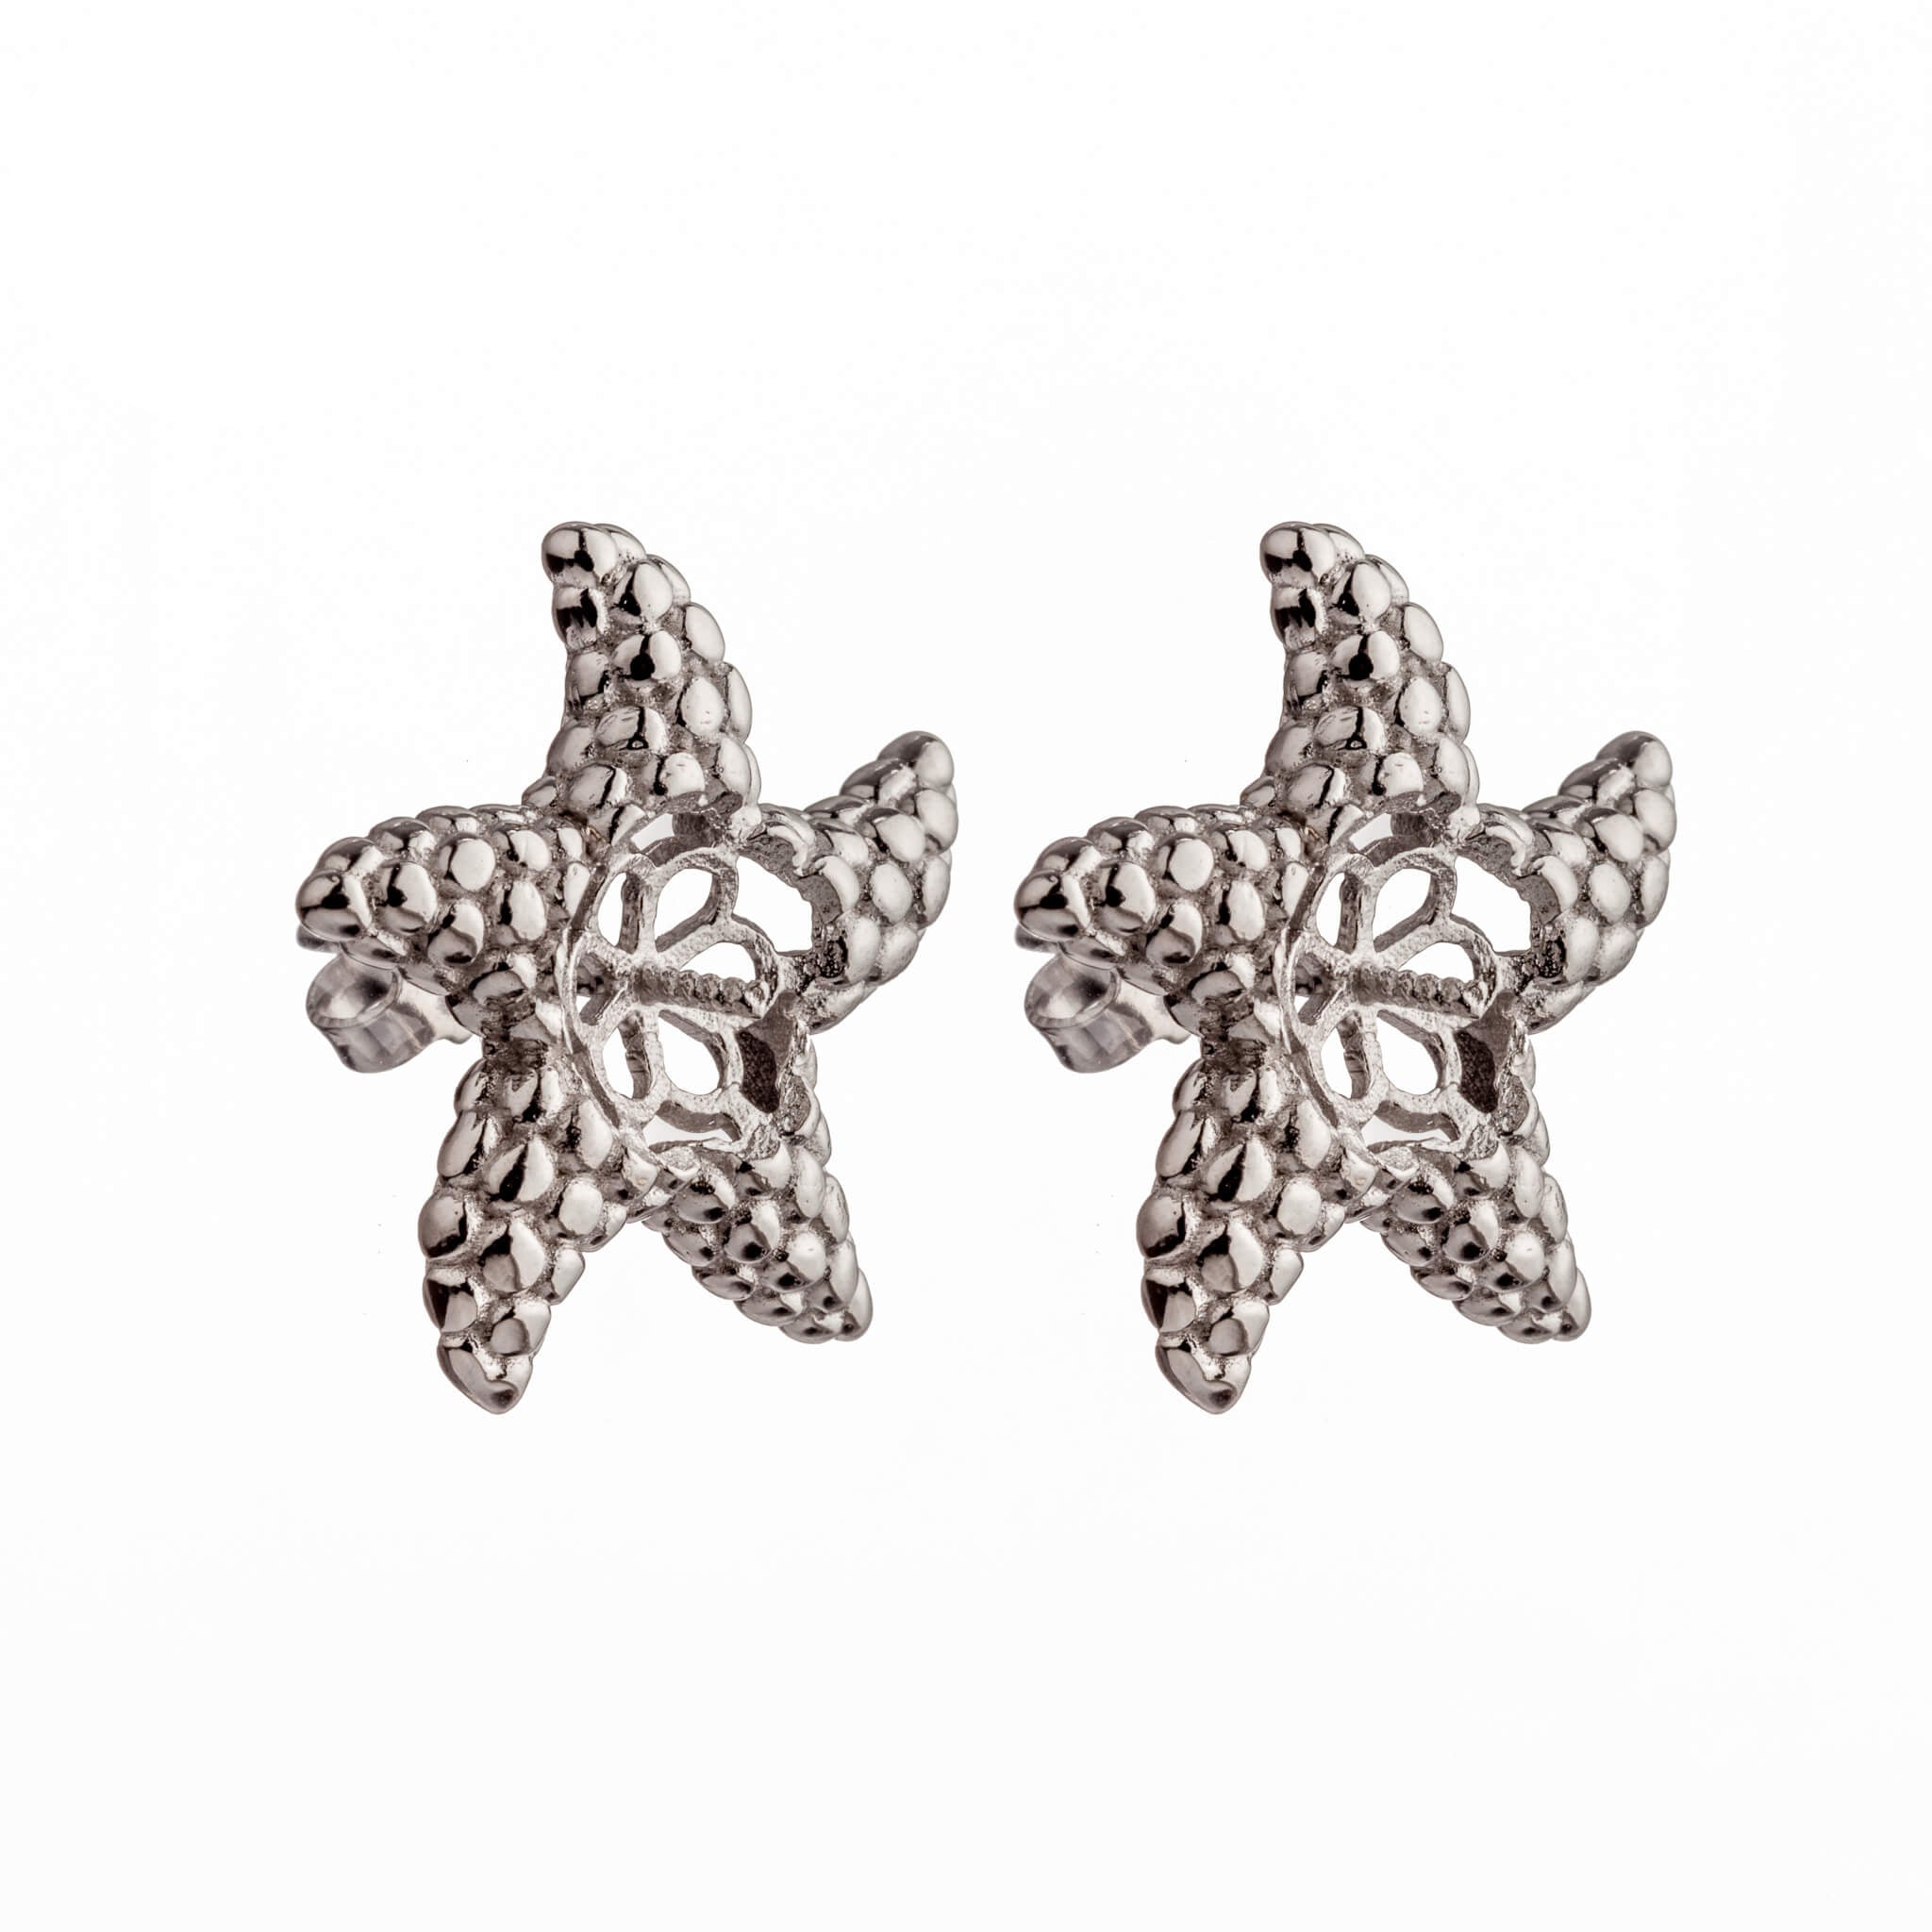 Starfish Ear Studs with Cup and Peg Mounting in Sterling Silver